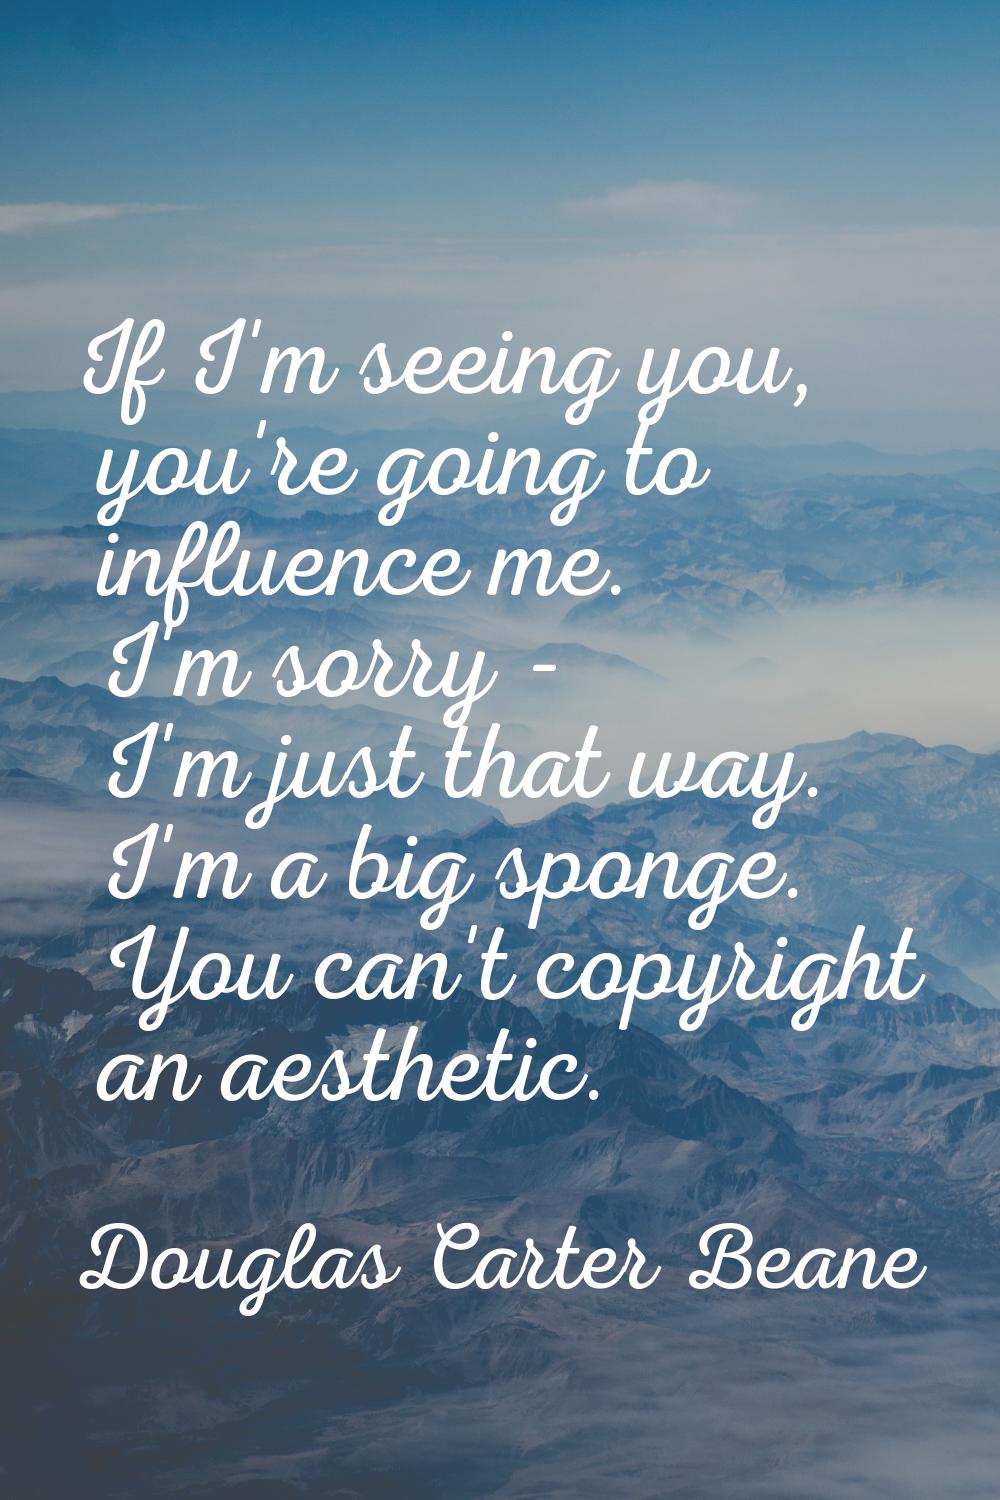 If I'm seeing you, you're going to influence me. I'm sorry - I'm just that way. I'm a big sponge. Y